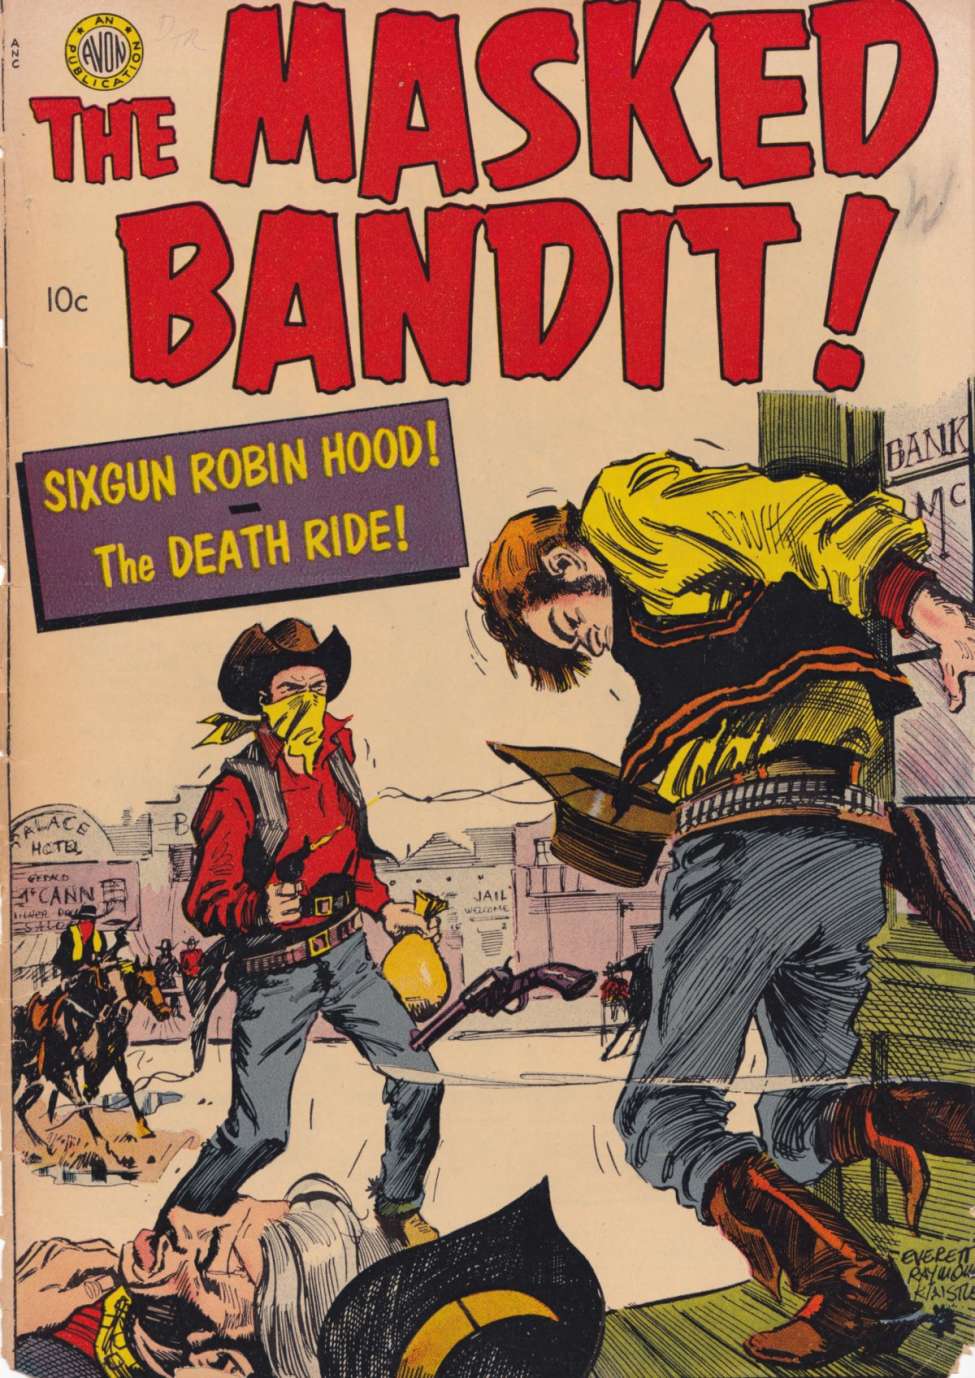 Book Cover For Masked Bandit (nn)